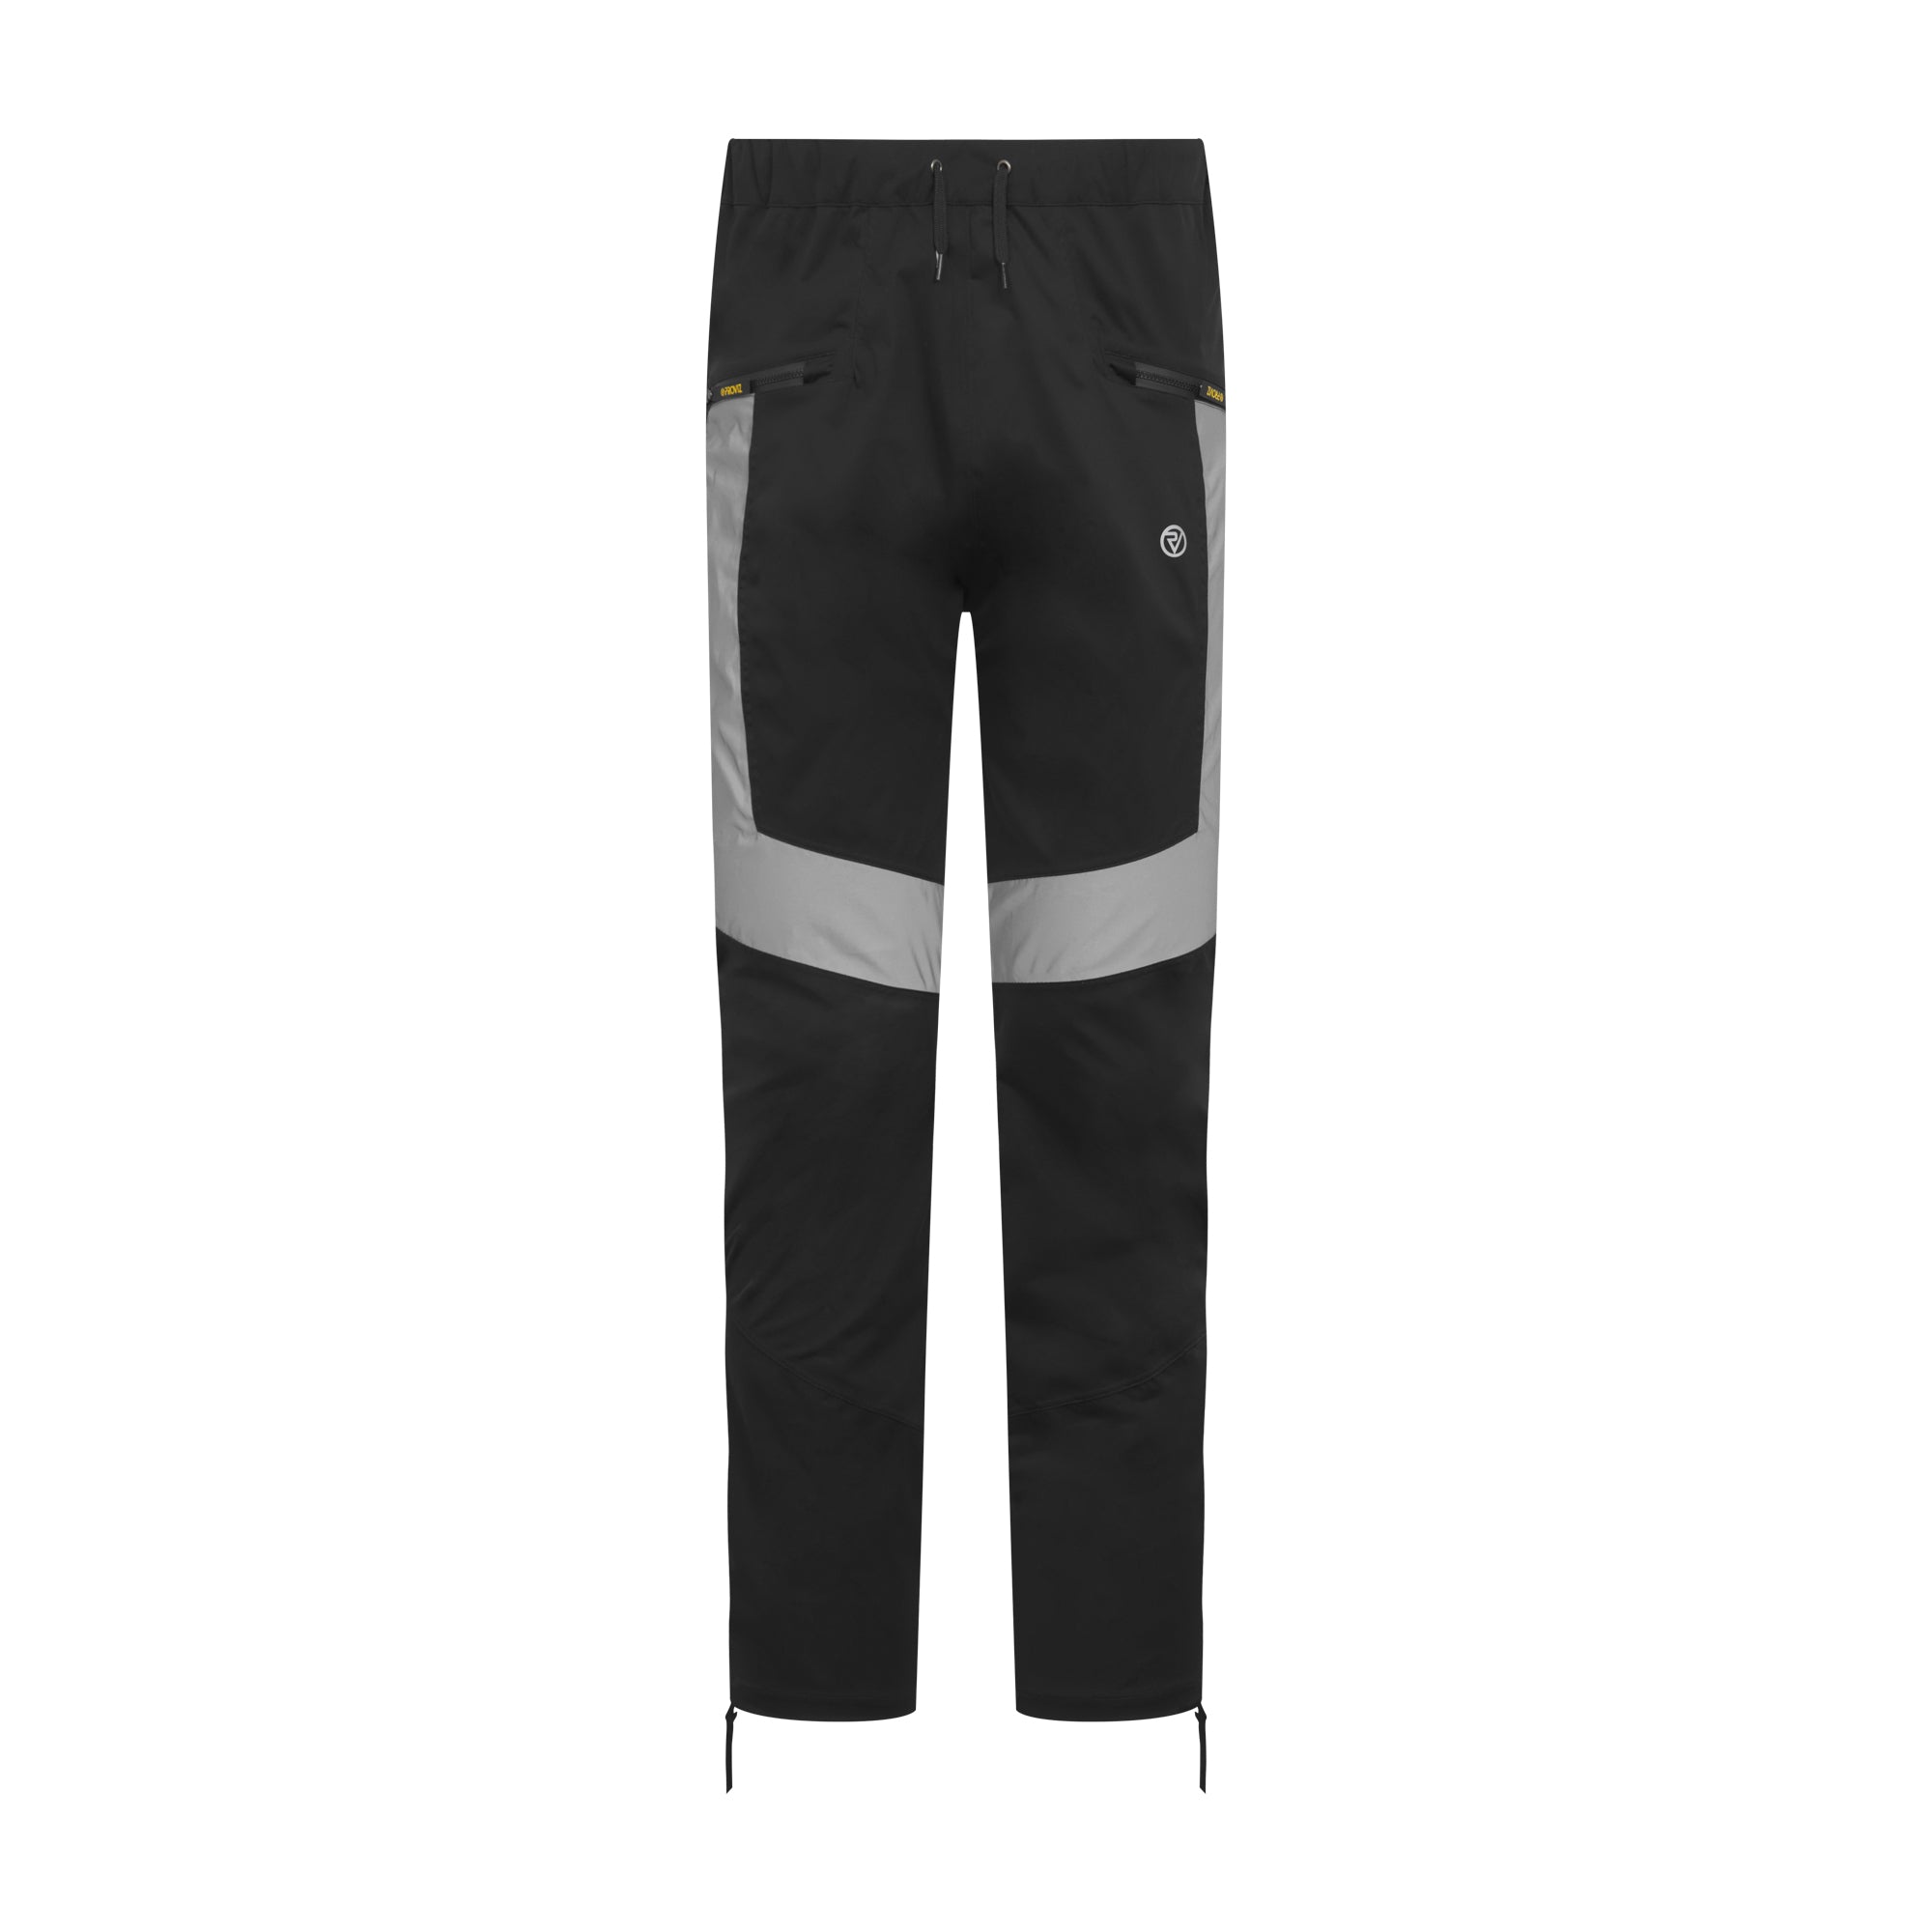 Men’s Tailored Waterproof Cycling Trousers